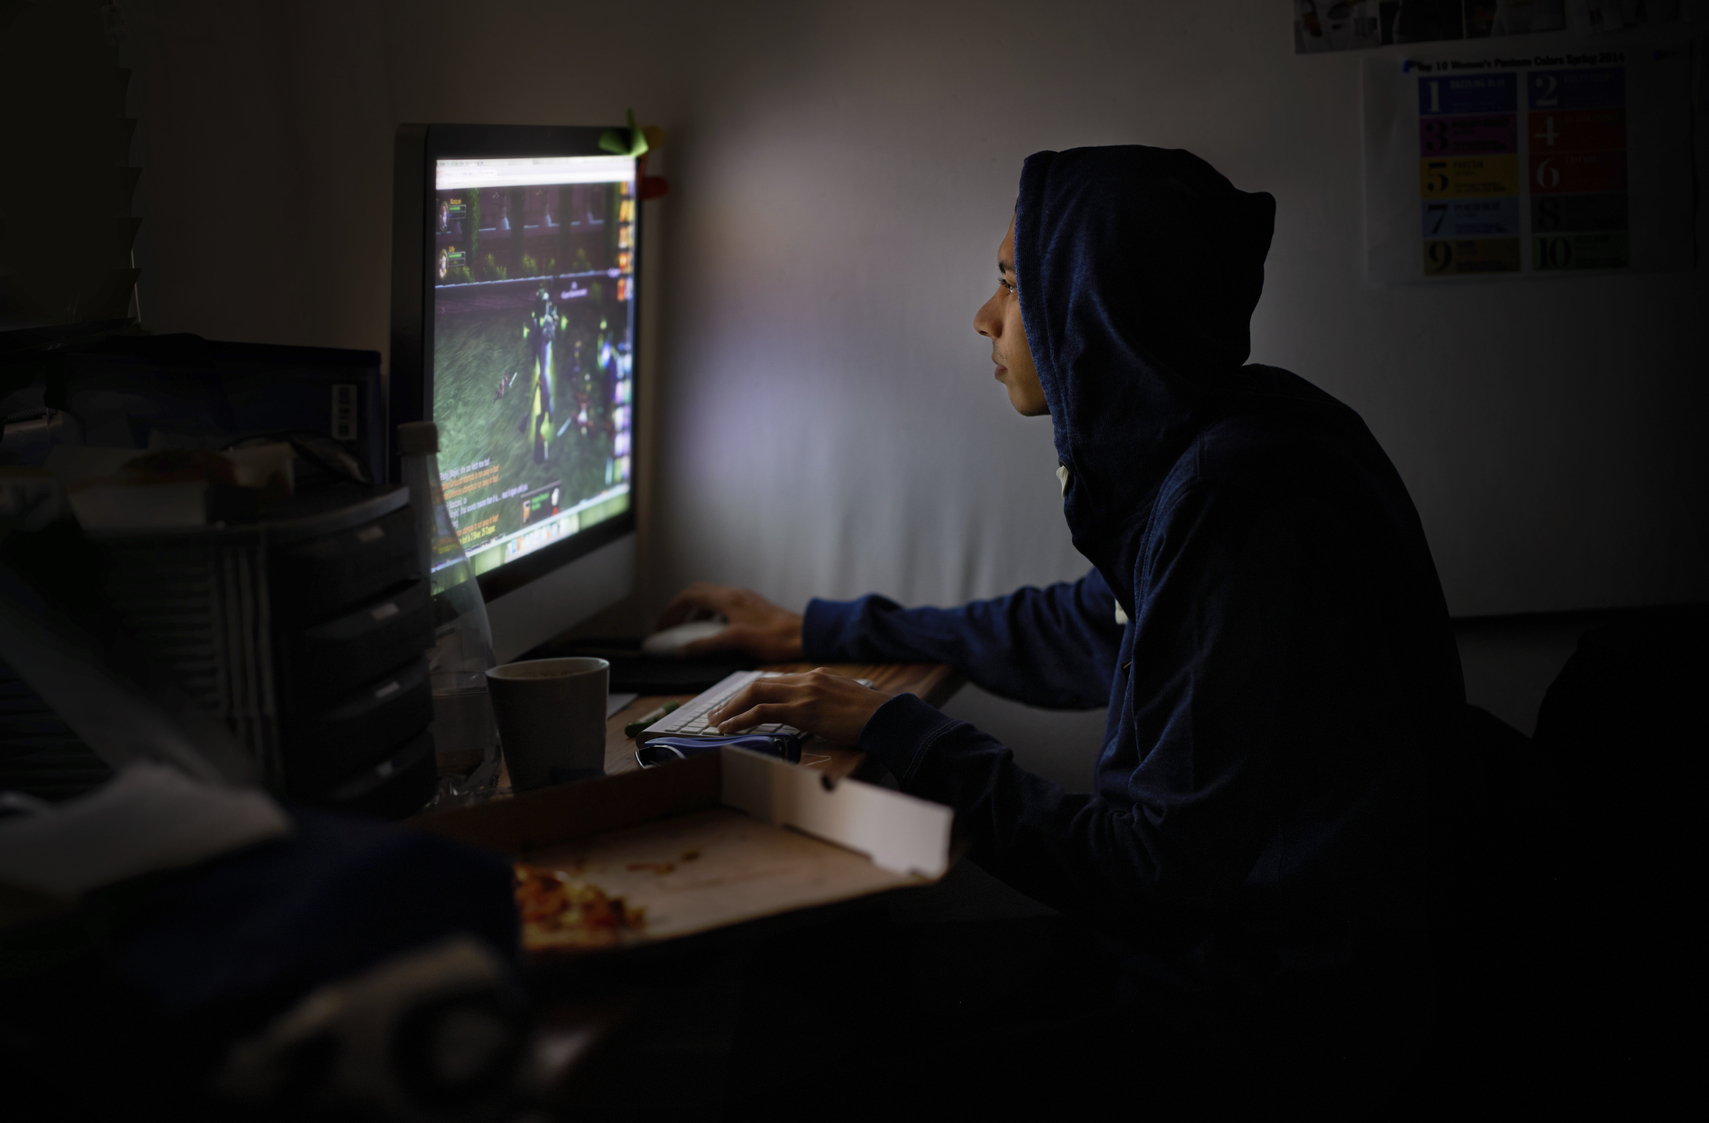 Shot of a young gamer focused on his game - ALL screen content on this image is created from scratch by Yuri Arcurs'  team of professionals for this particular photo shoothttp://195.154.178.81/DATA/i_collage/pi/shoots/783867.jpg